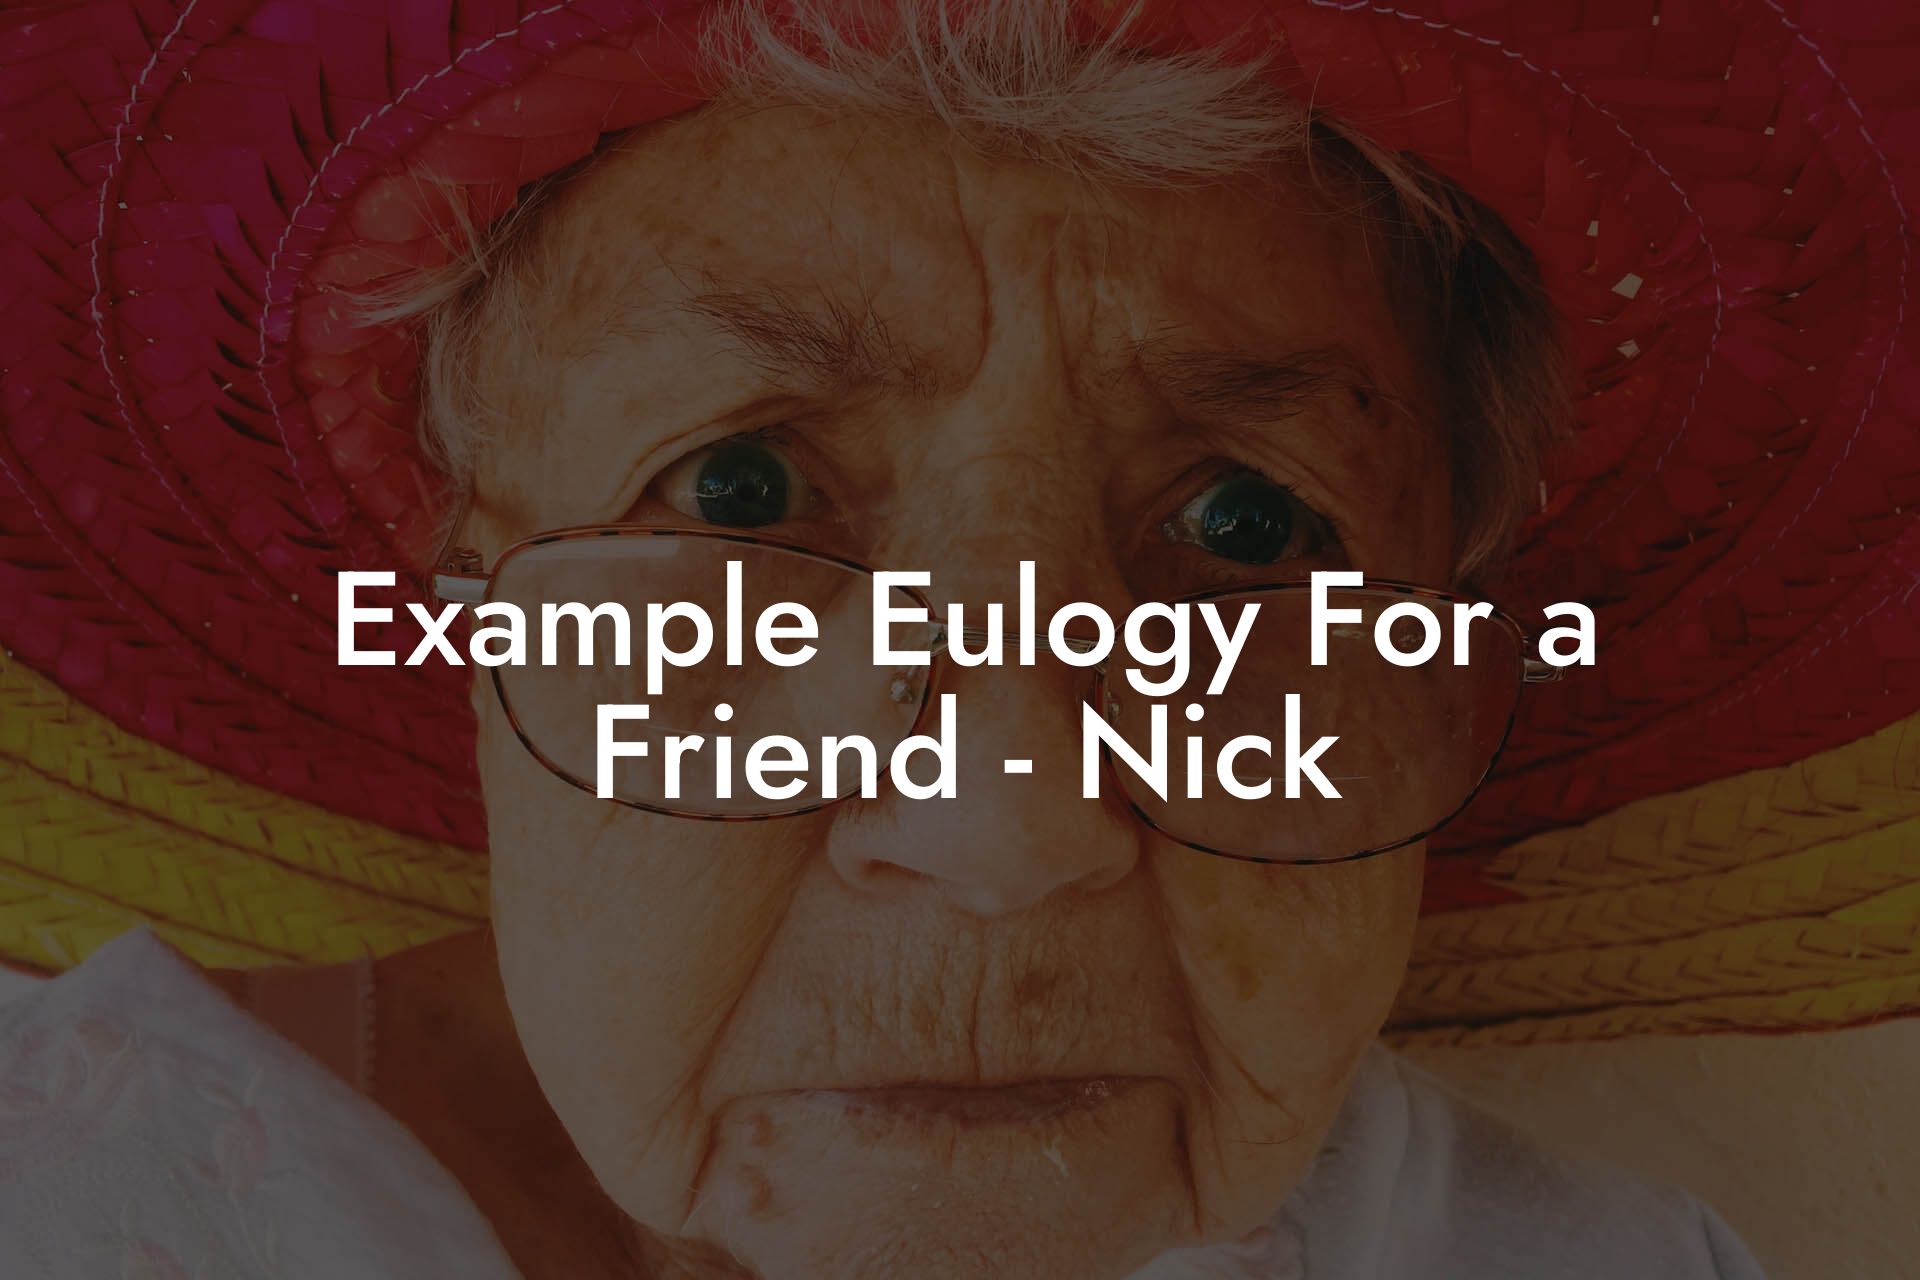 Example Eulogy For a Friend - Nick